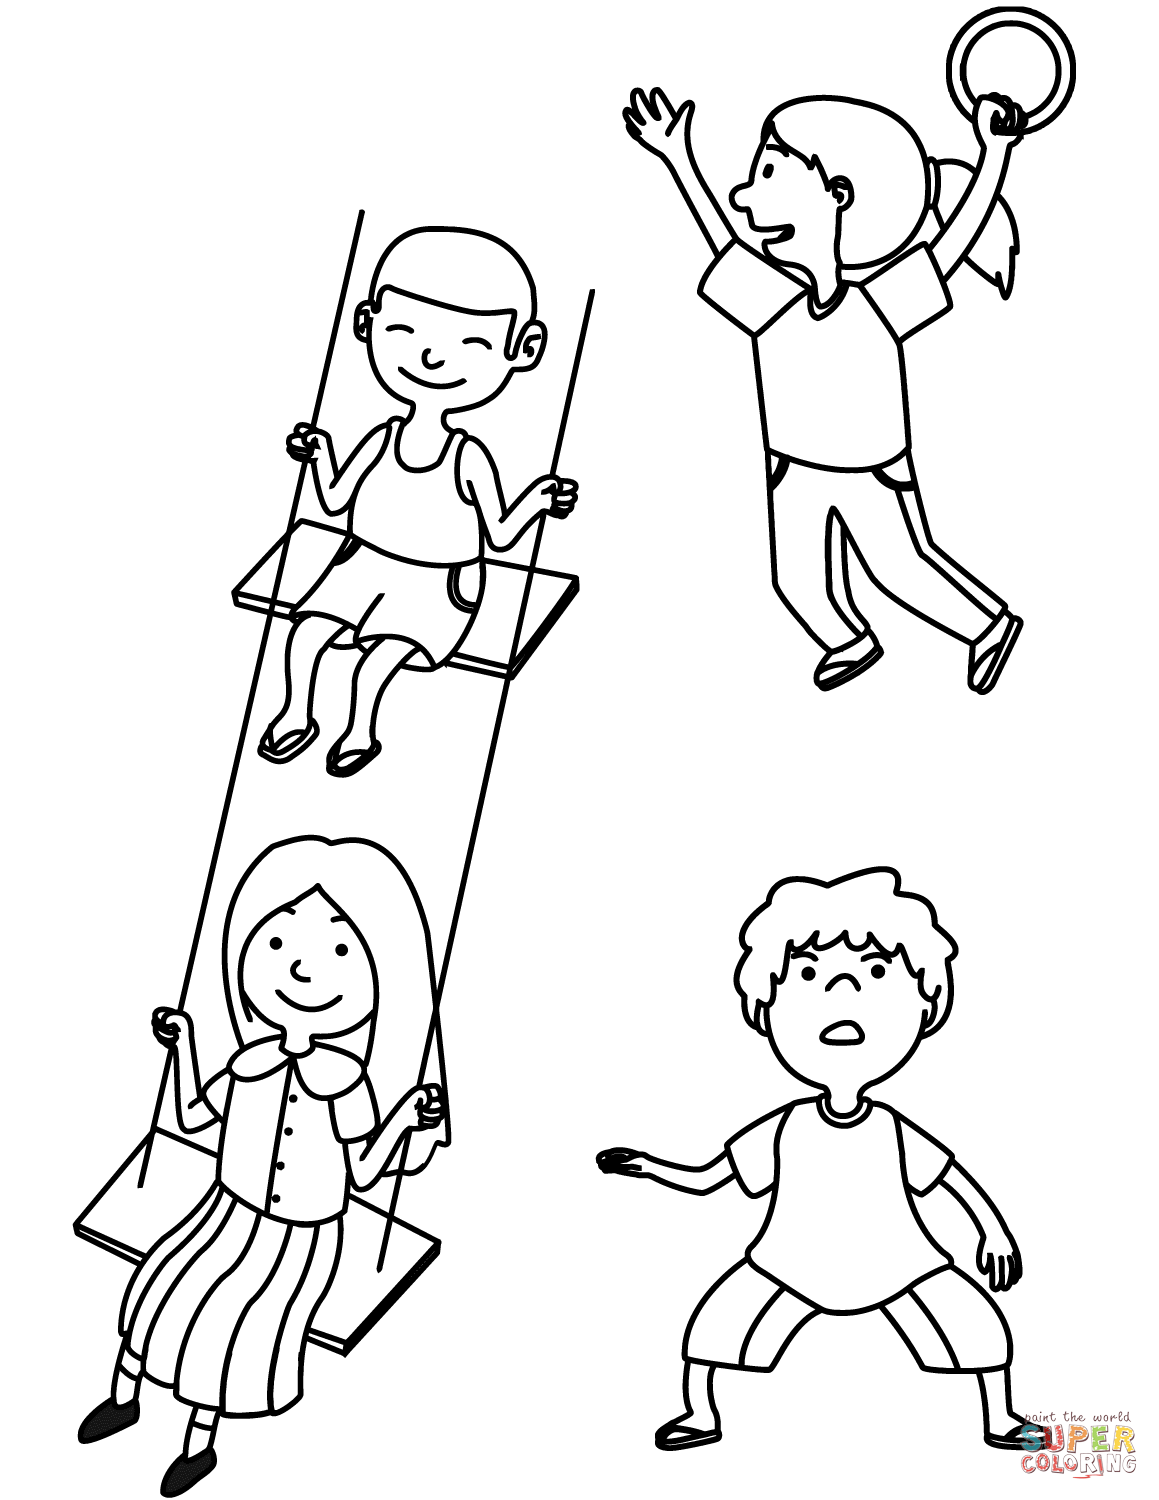 Children on the playground coloring page free printable coloring pages